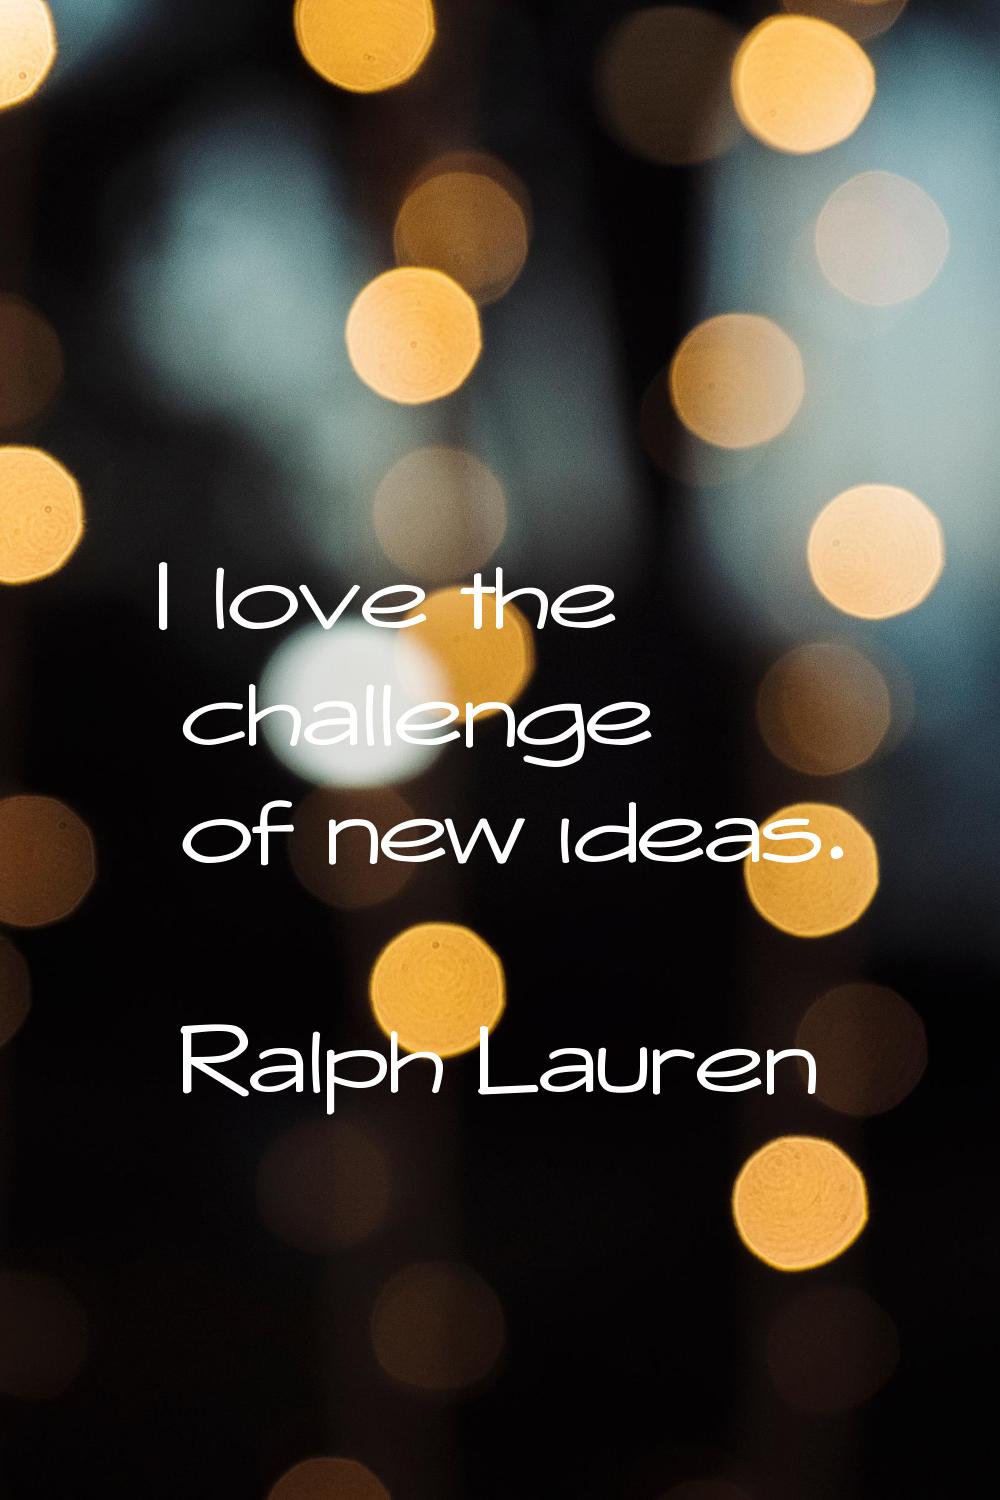 I love the challenge of new ideas.